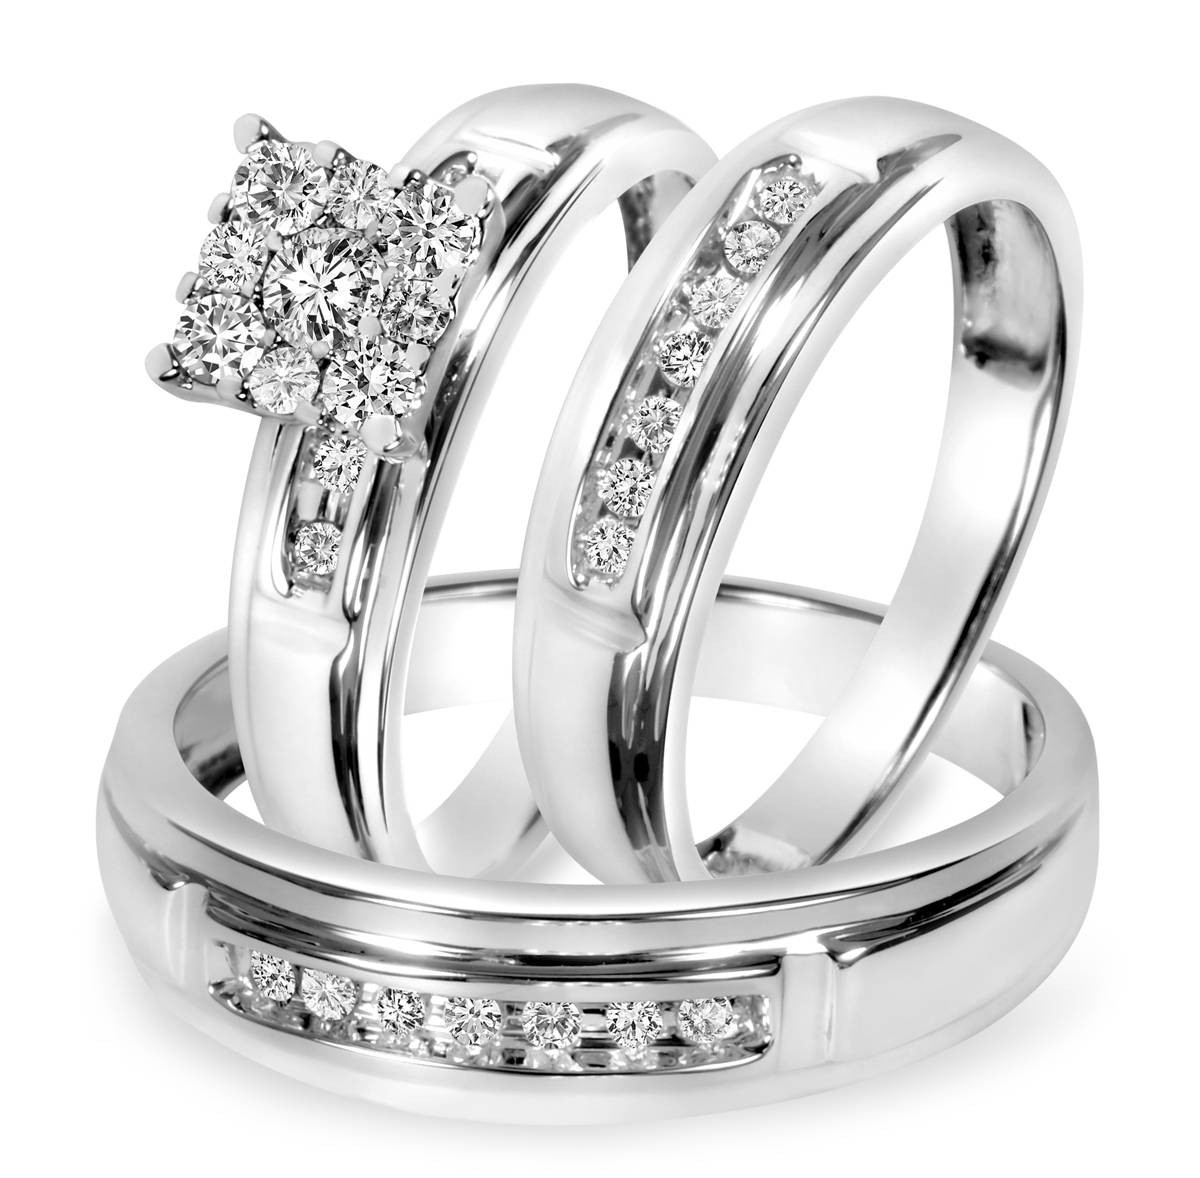 Wedding Rings Trio Sets For Cheap
 15 Inspirations of Cheap Wedding Bands Sets His And Hers